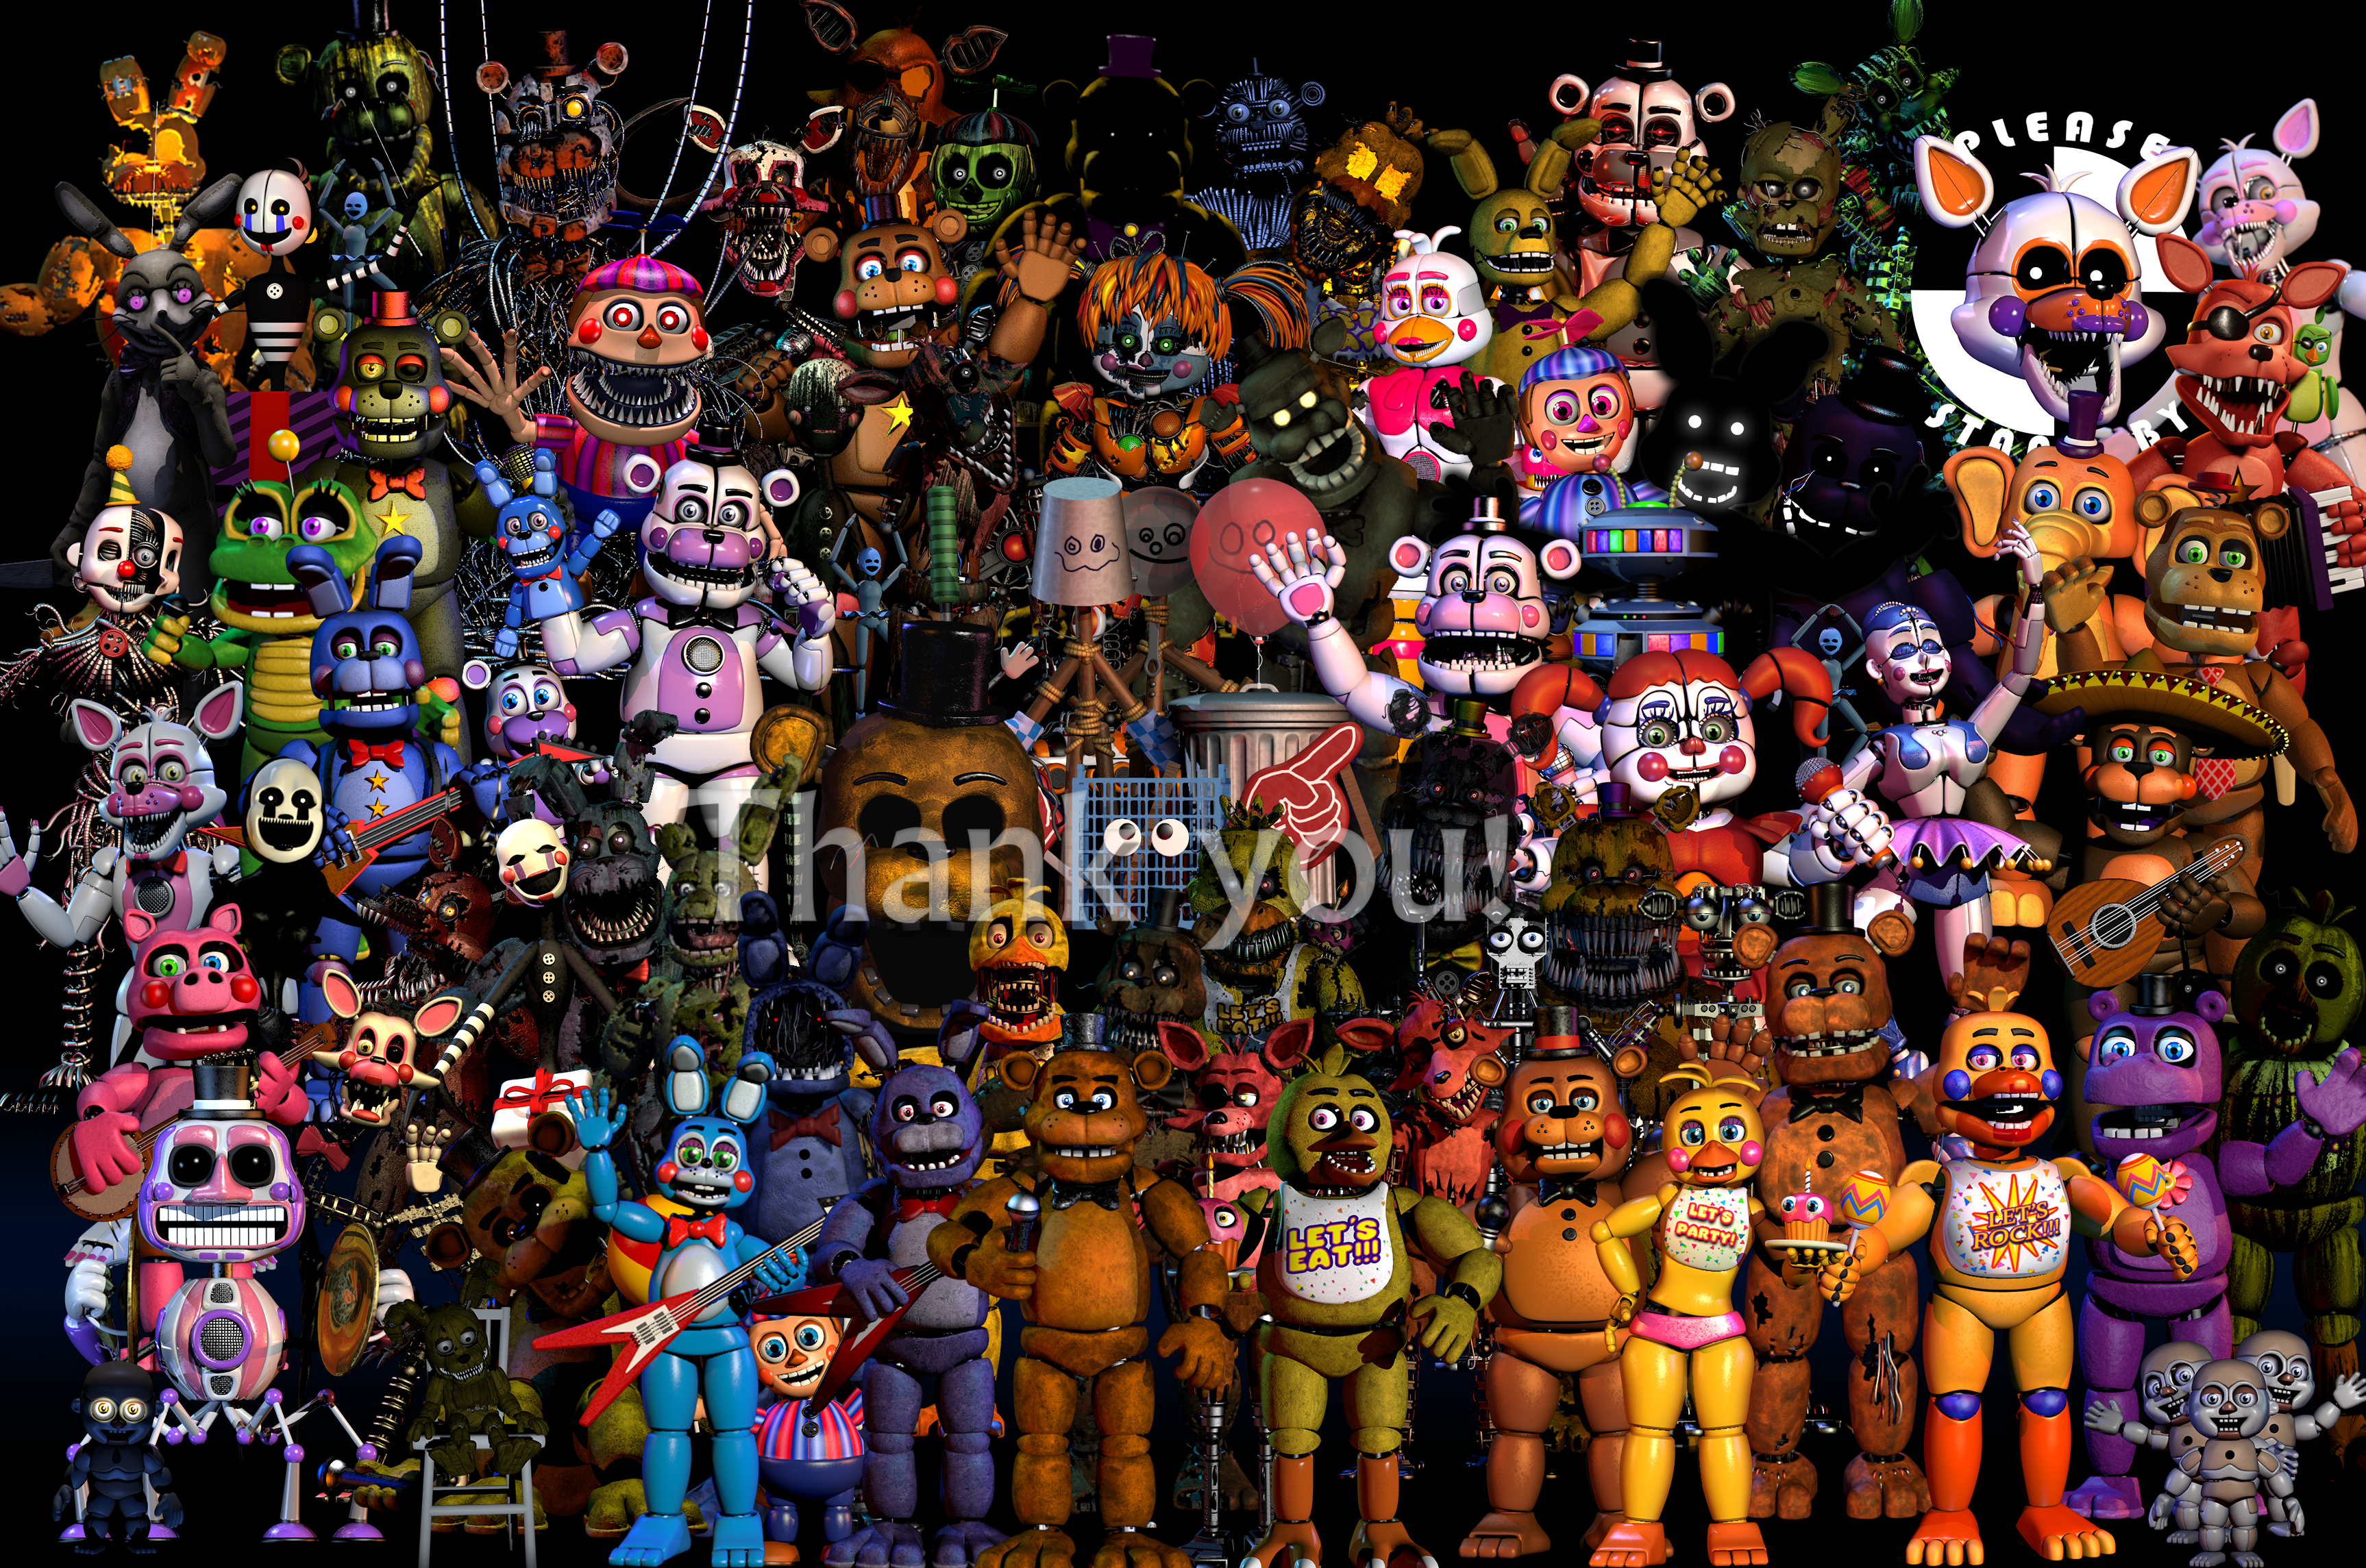 Congratulations, Five Nights at Freddy's! by GamingOmega99 on